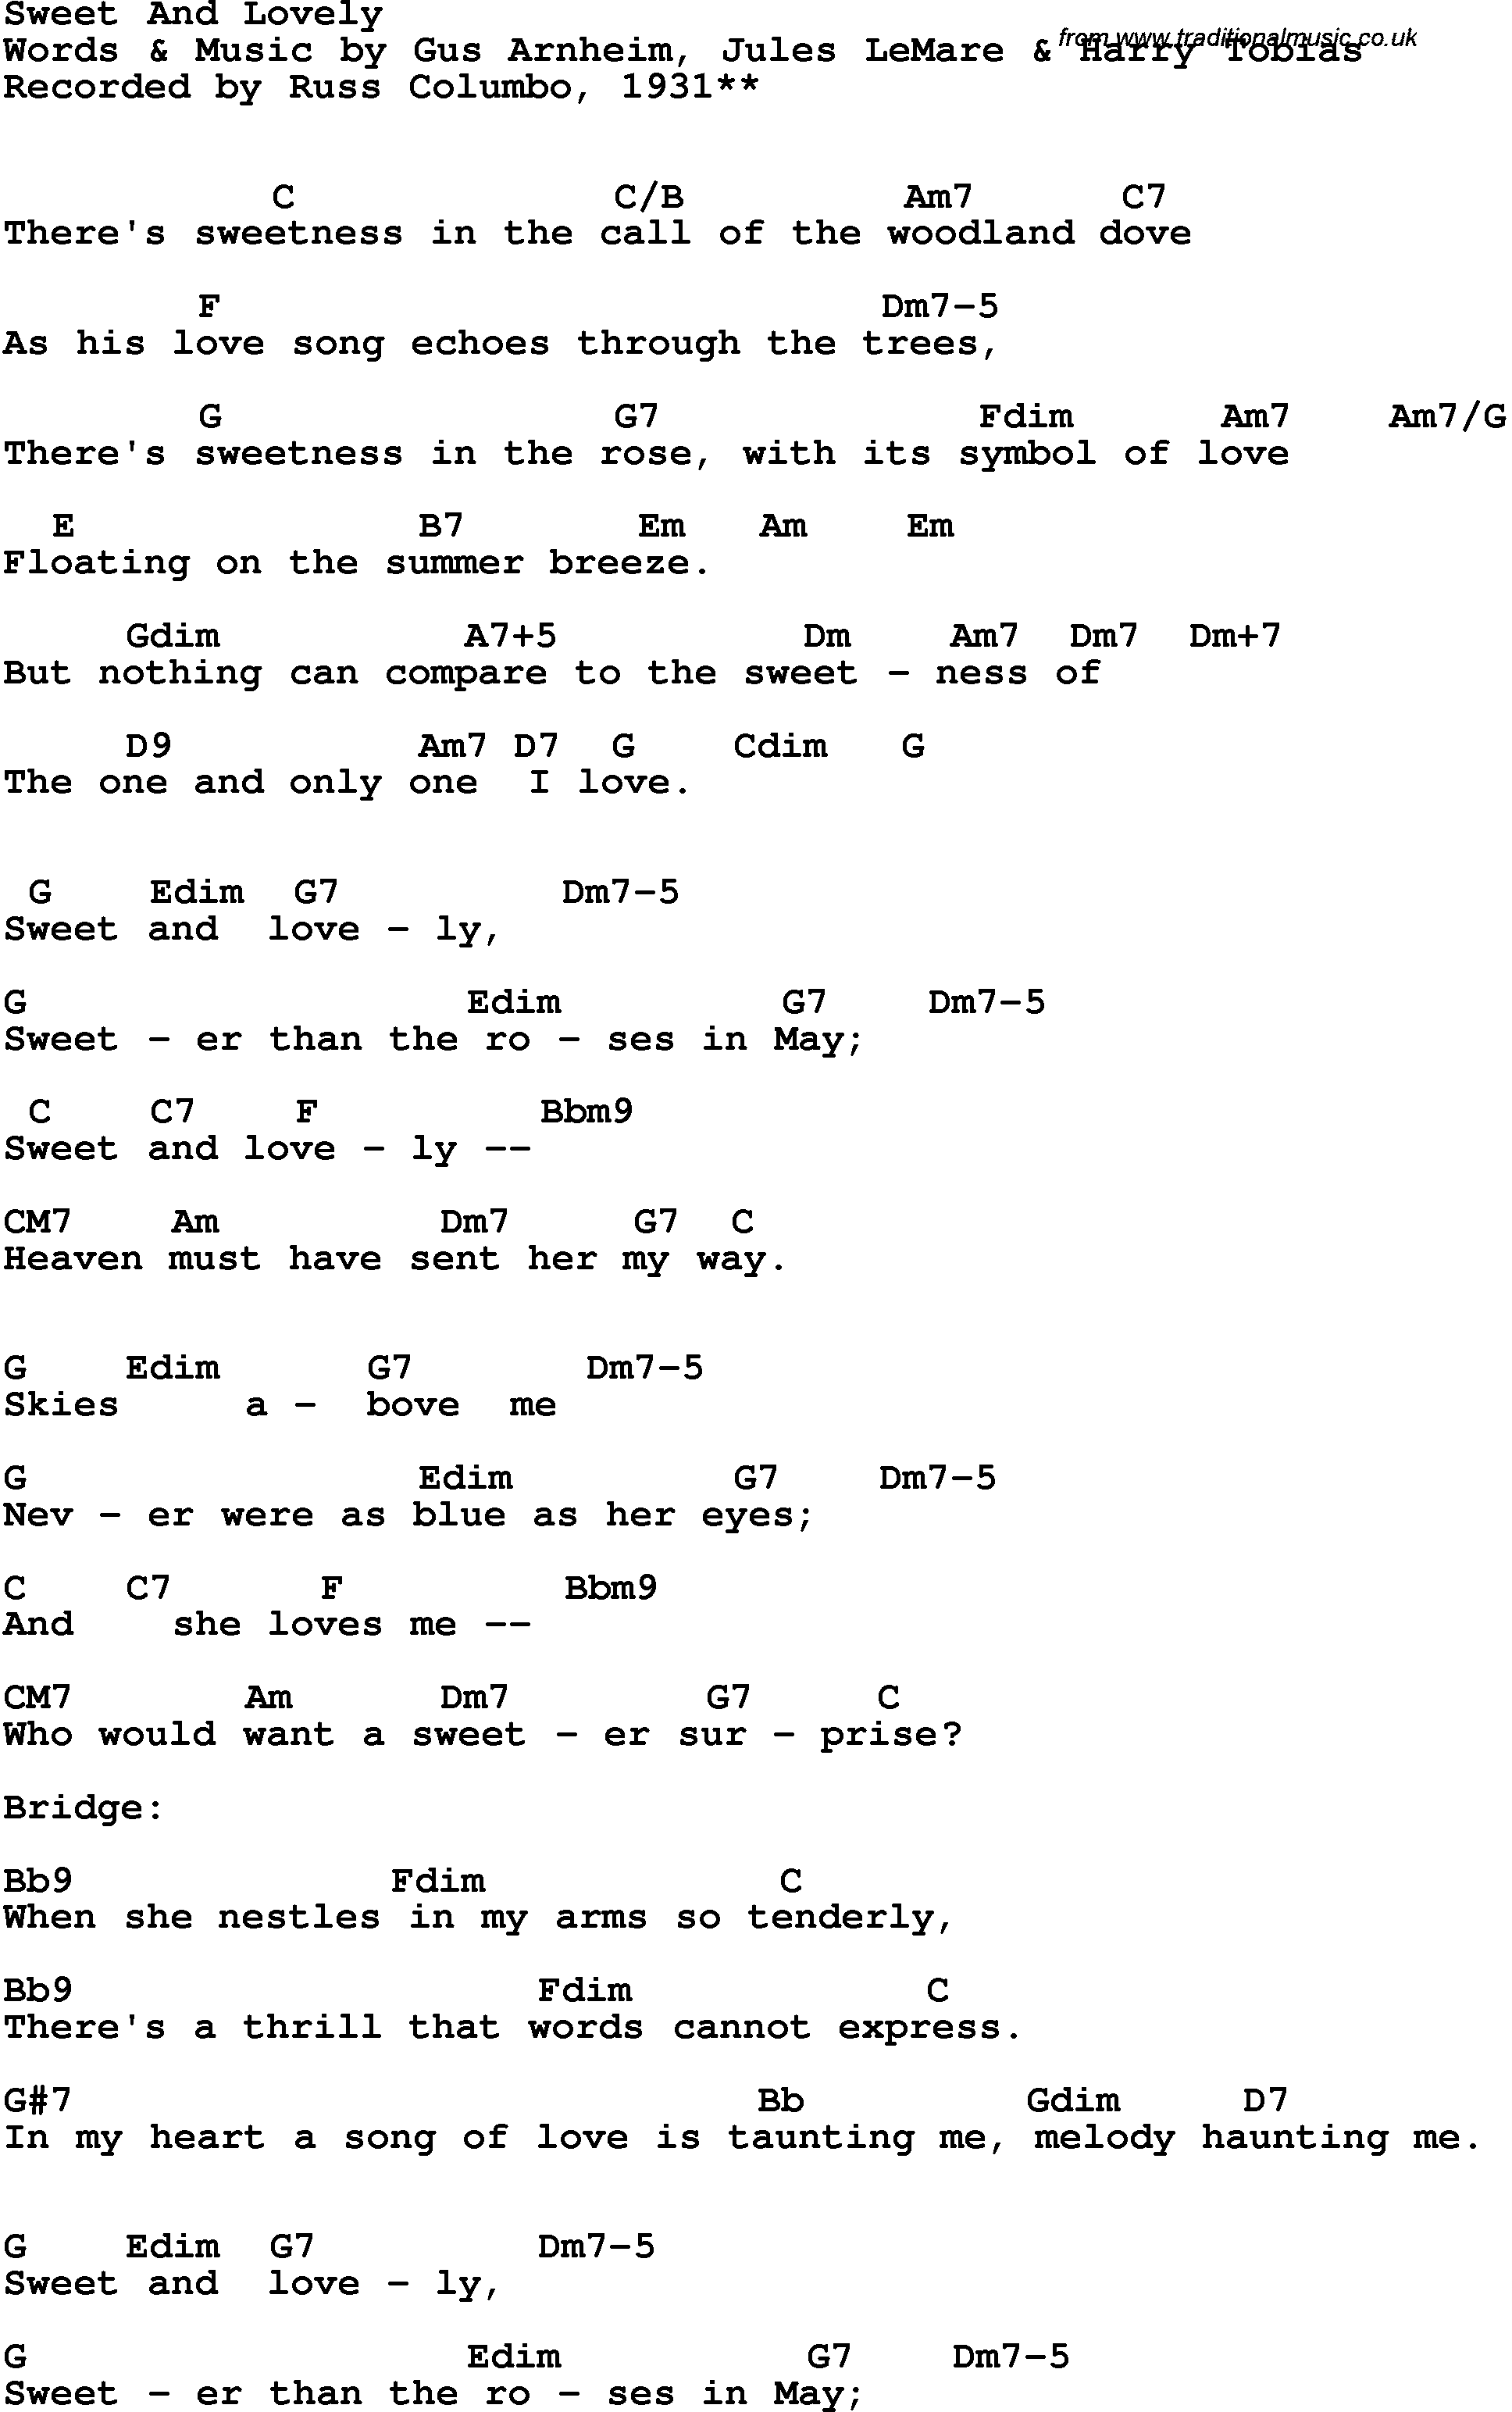 Song Lyrics with guitar chords for Sweet And Lovely - Russ Columboa, 1931